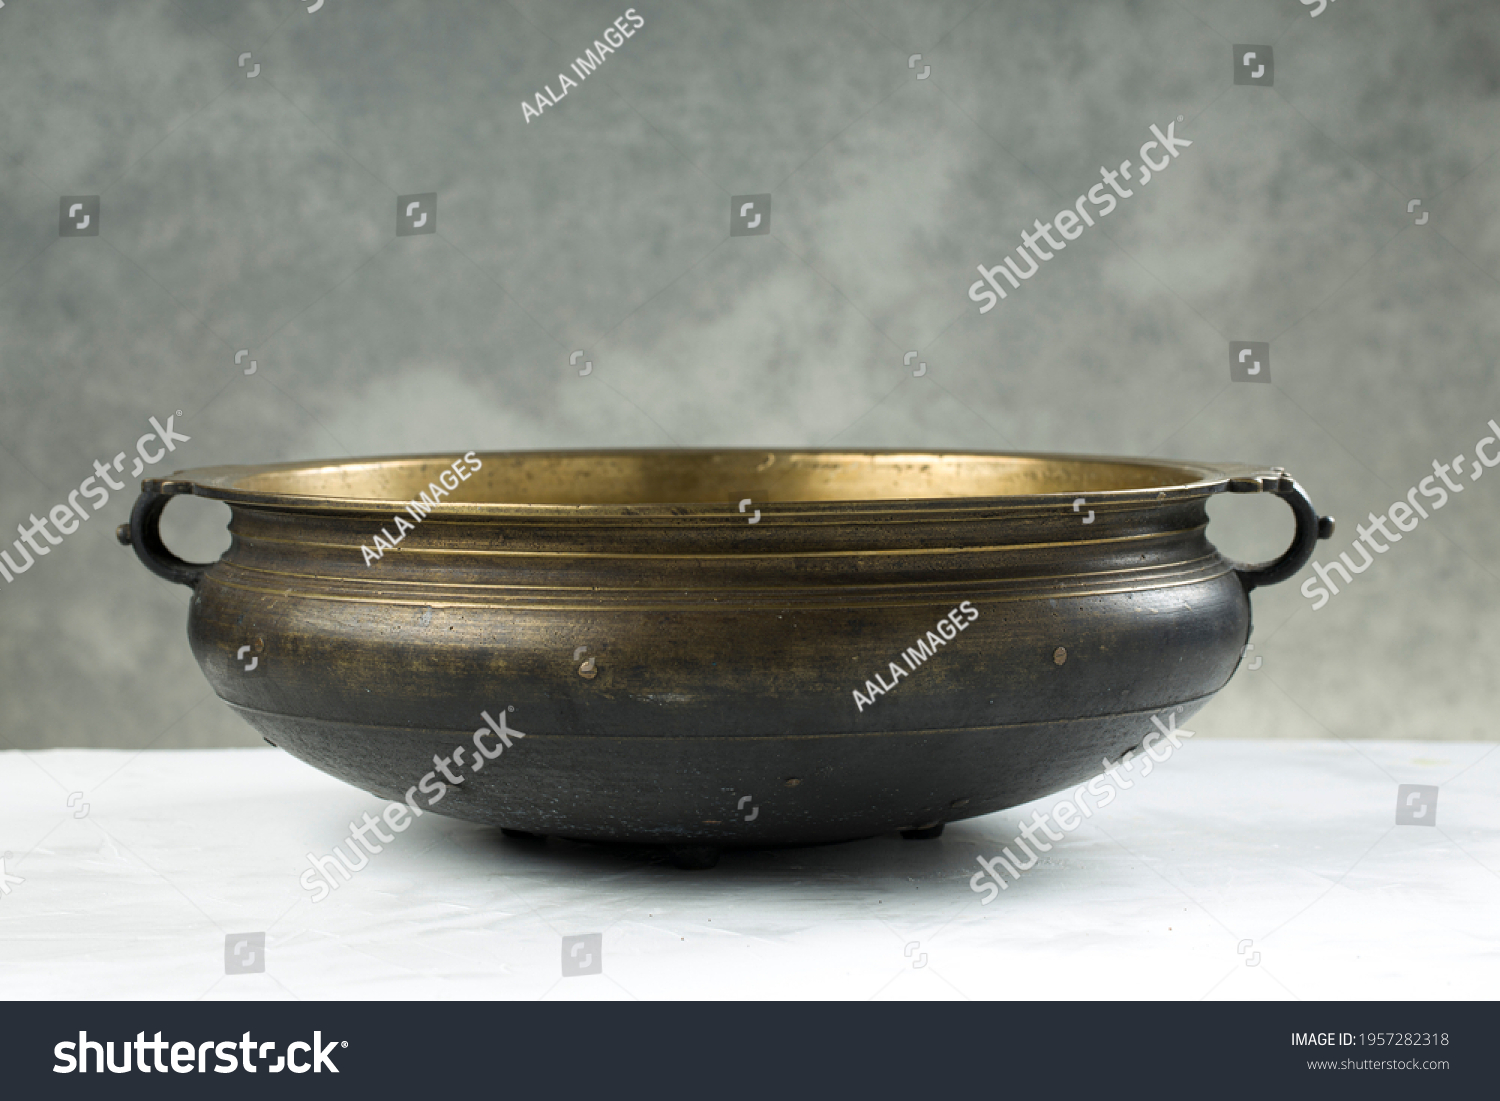 Urule or Brass vessel,an empty traditional  south Indian cooking vessel which is an antique piece placed on grey textured background. #1957282318